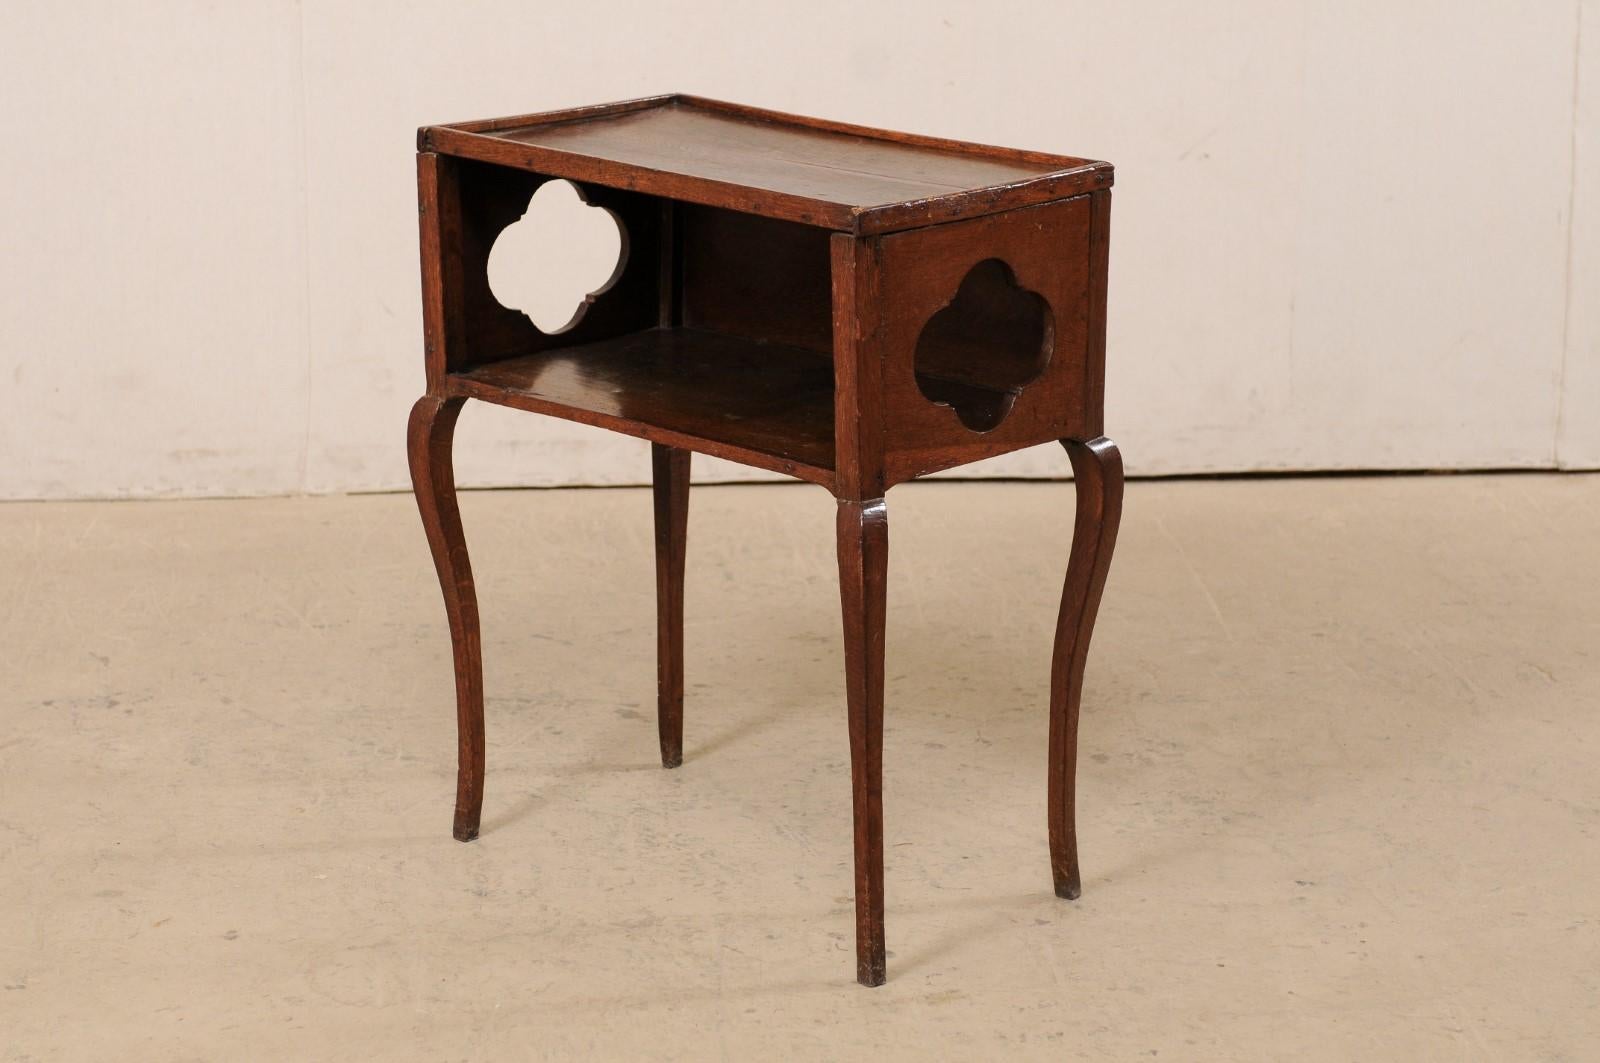 19th C. French Side Table with Quatrefoil Cut-Outs at Sides, Lower Shelf/Cubie 4